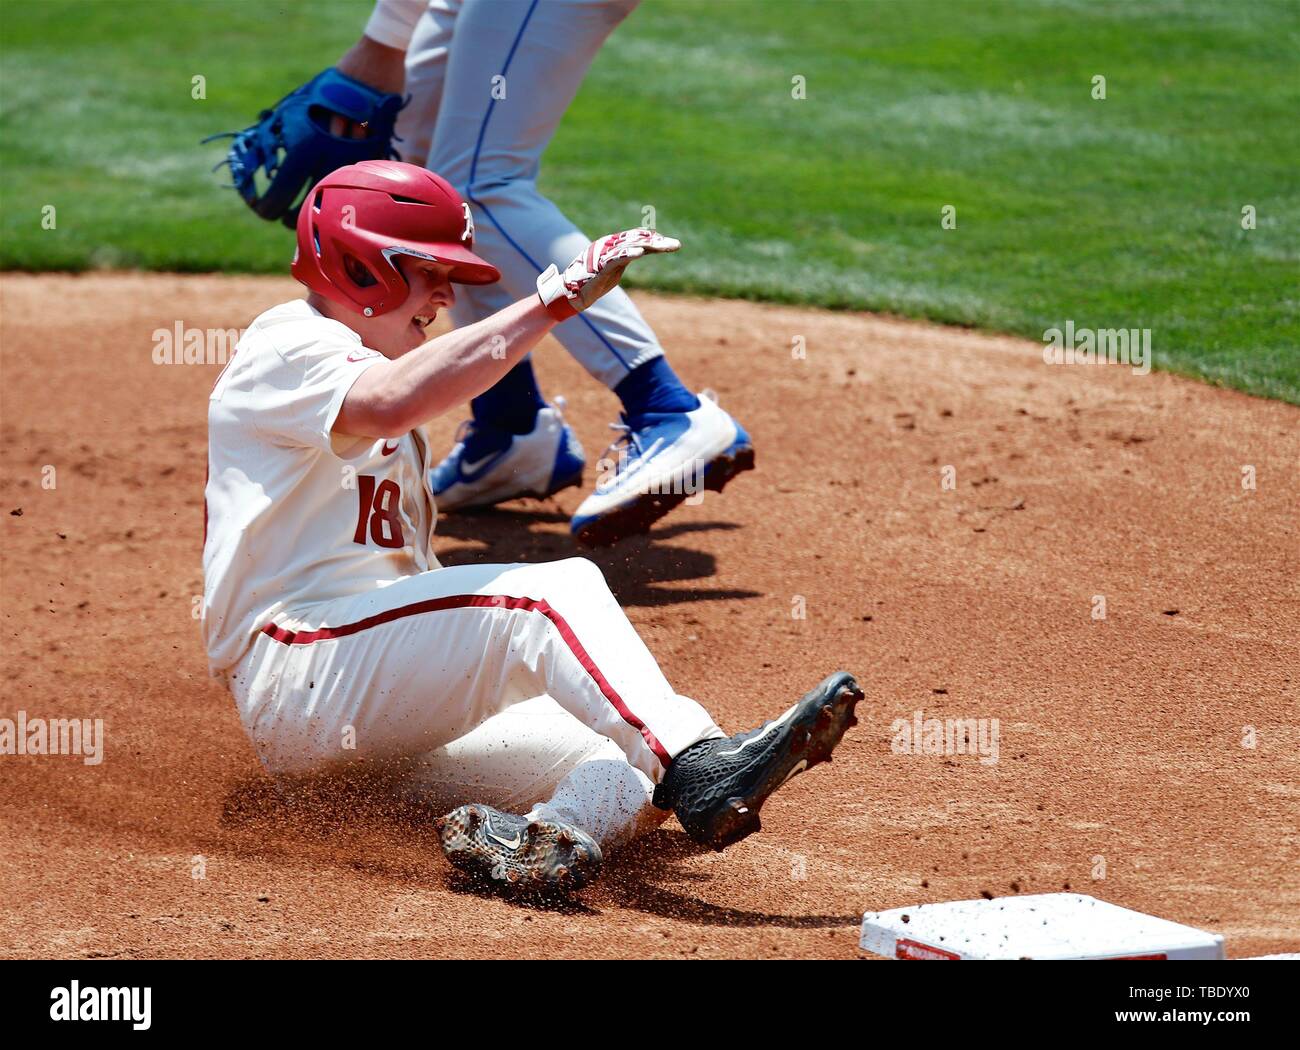 May 31, 2019: Razorback outfielder Heston Kjerstad #18 slides safely into third base. Arkansas defeated Central Connecticut 11-5 in Fayetteville, AR, Richey Miller/CSM Stock Photo